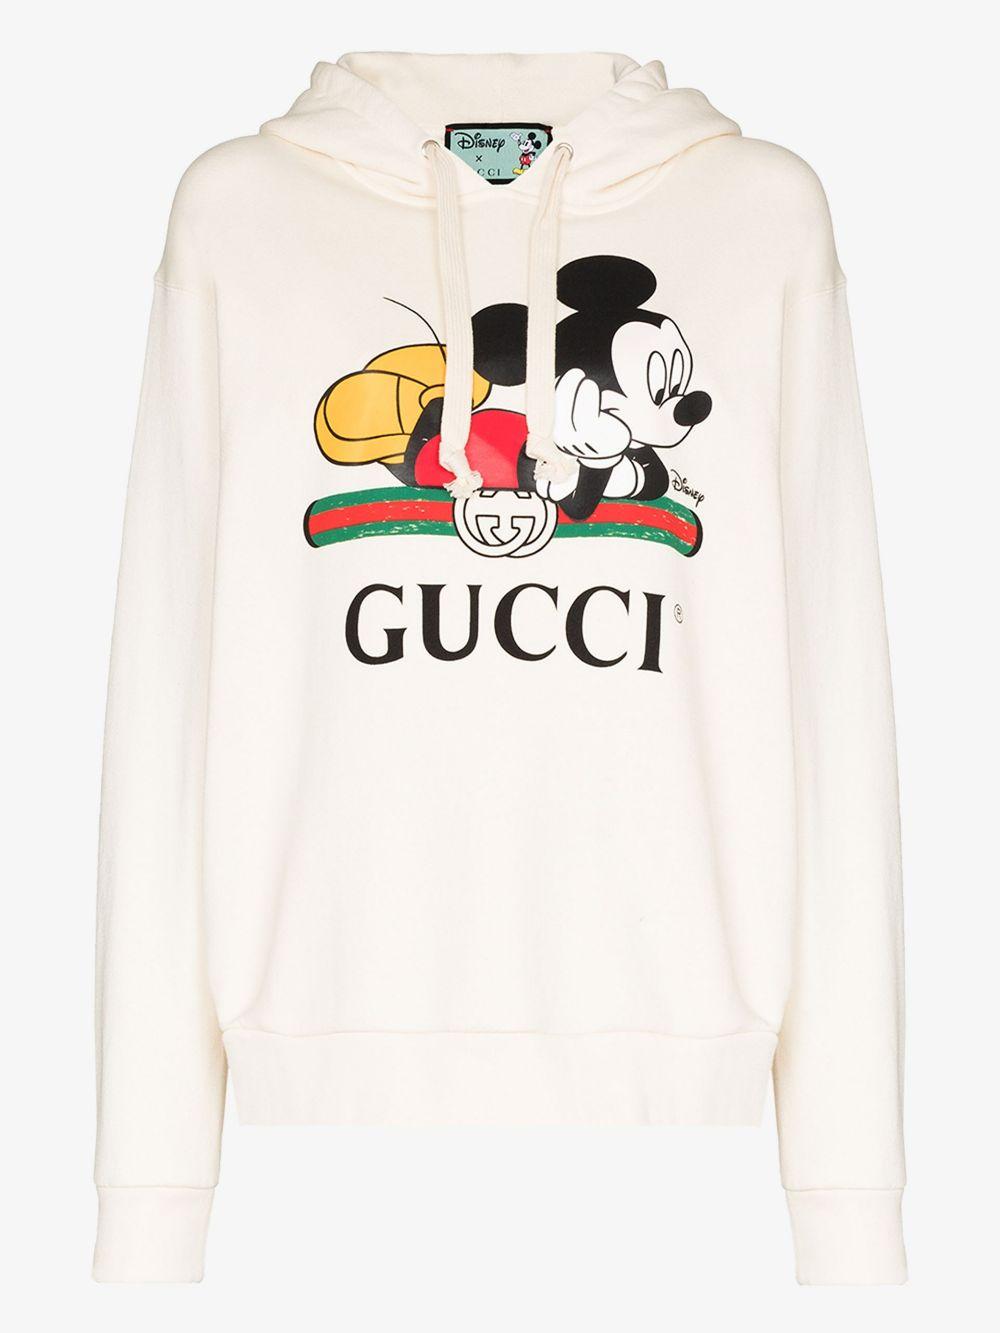 Top 78+ imagen gucci mickey mouse t shirt - Abzlocal.mx